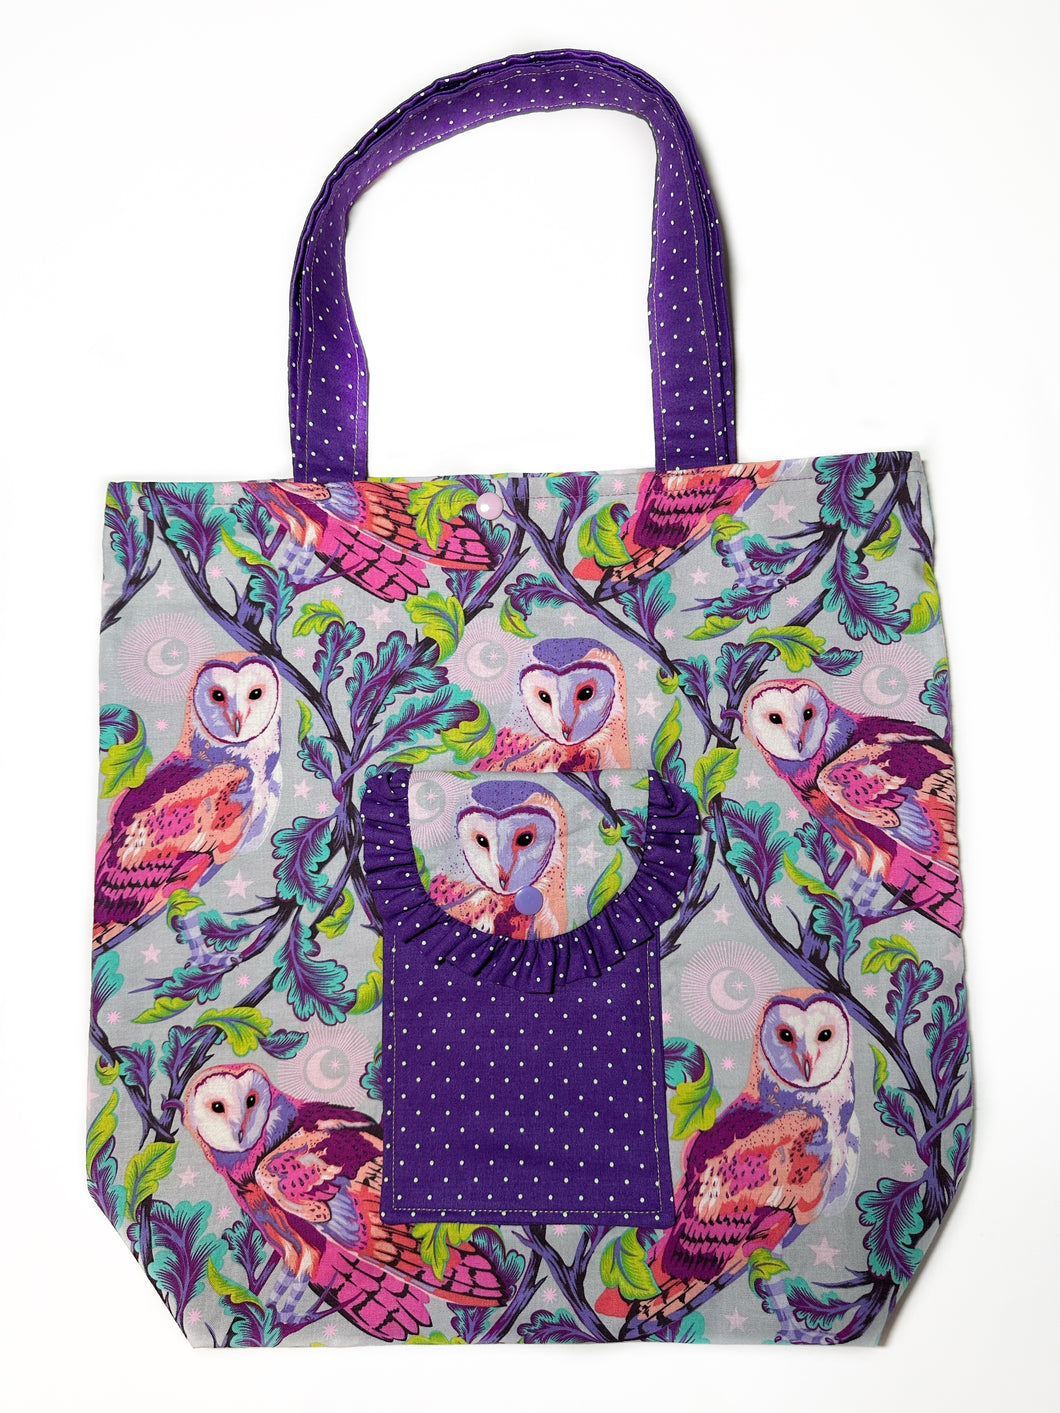 Owls - Roll Up Tote